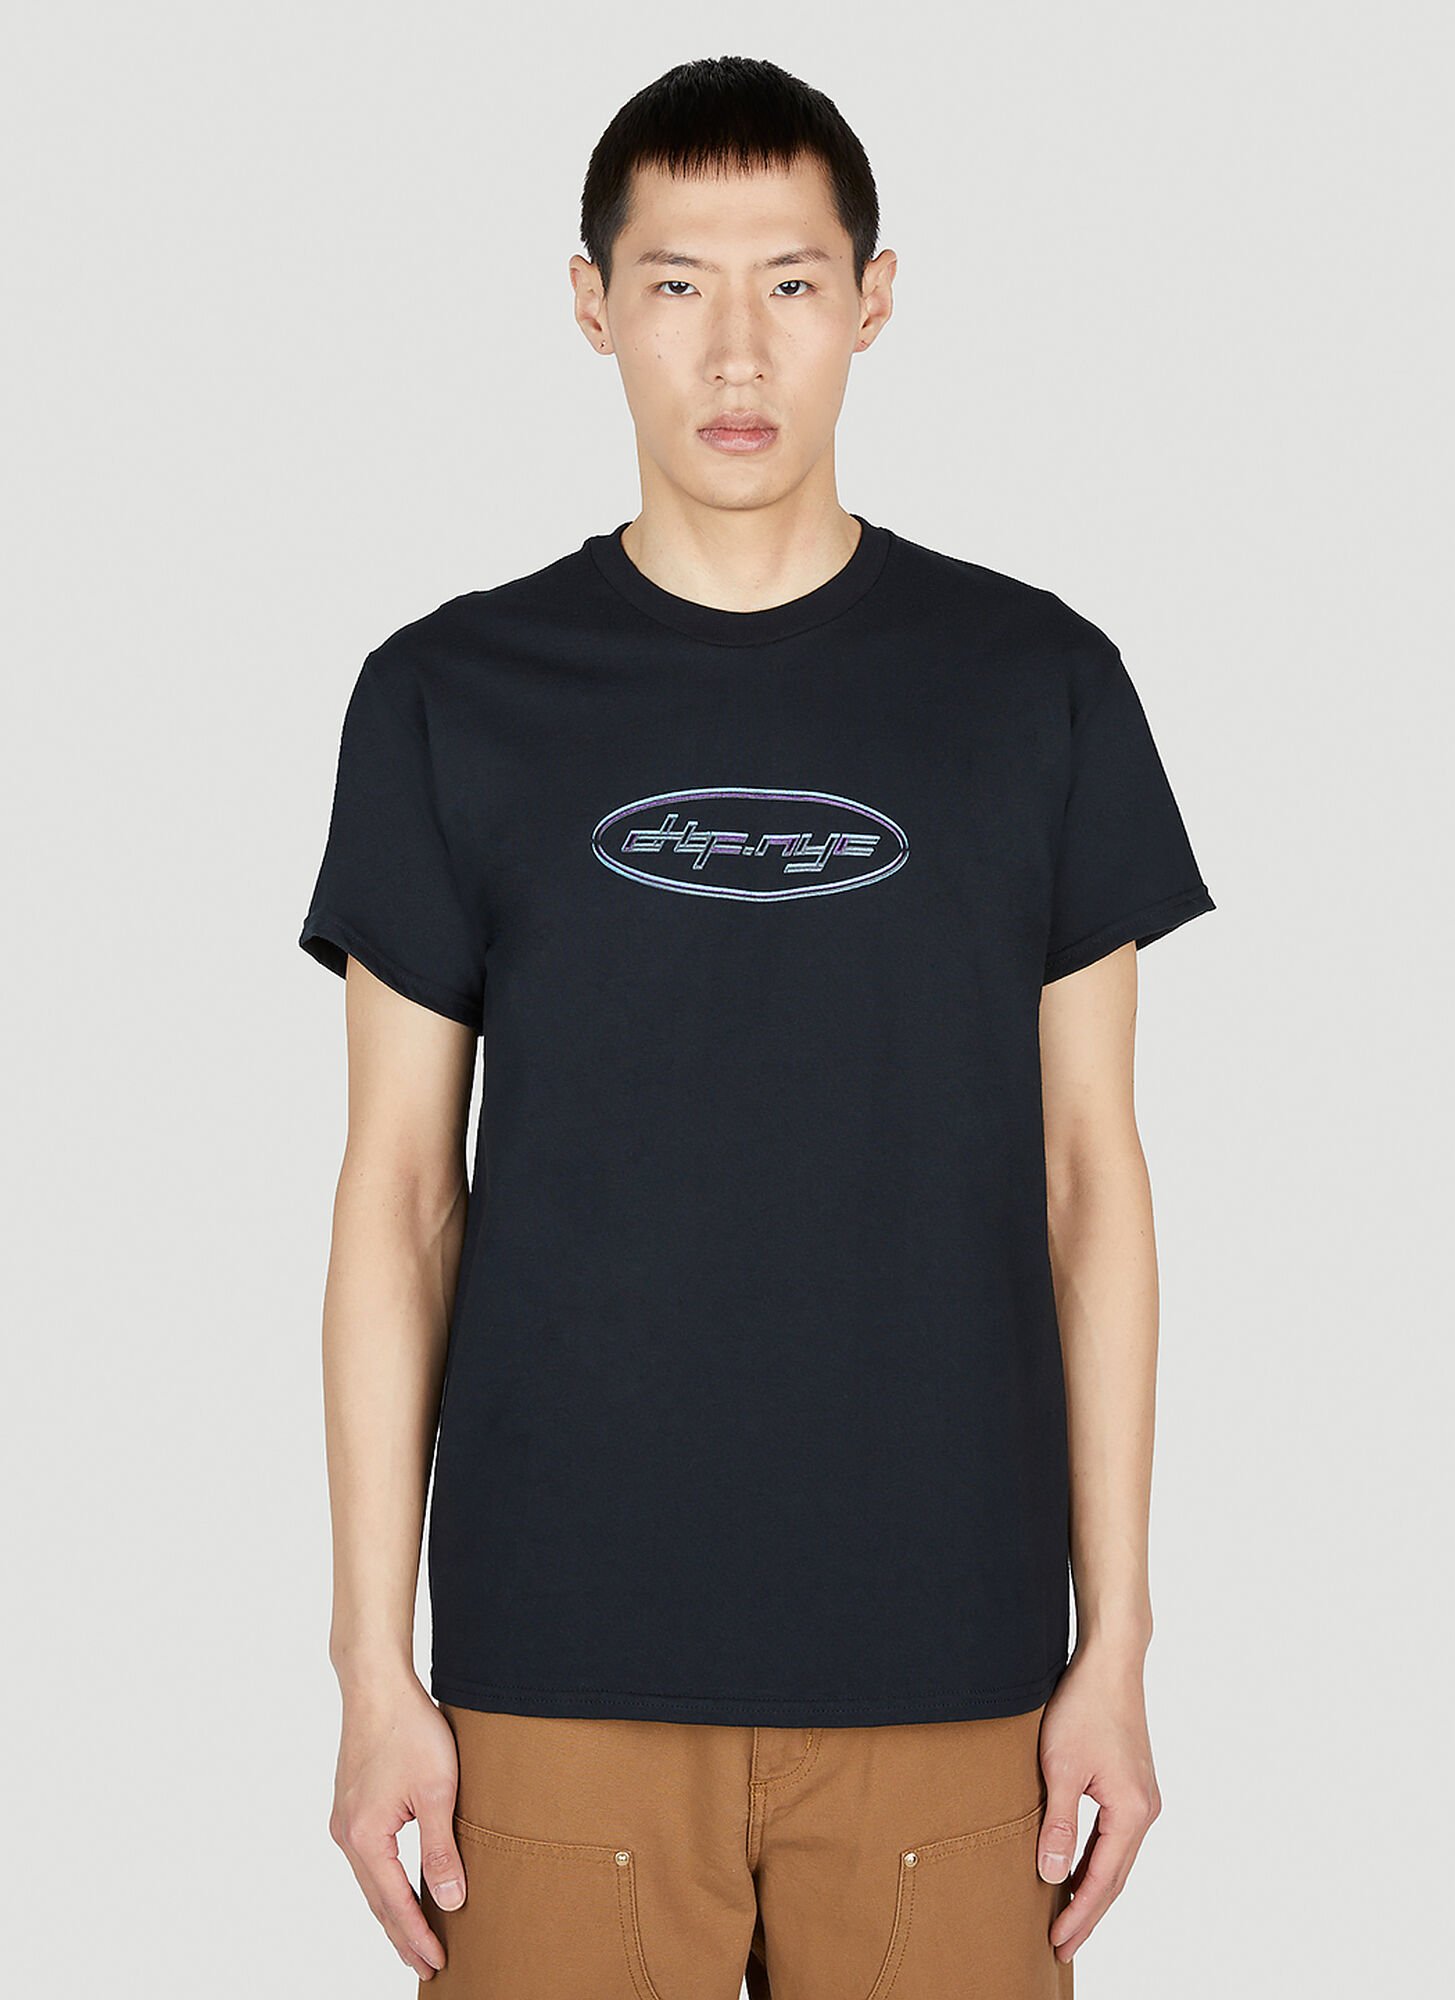 Dtf.nyc Cyber Logo Short-sleeved T-shirt Male Black